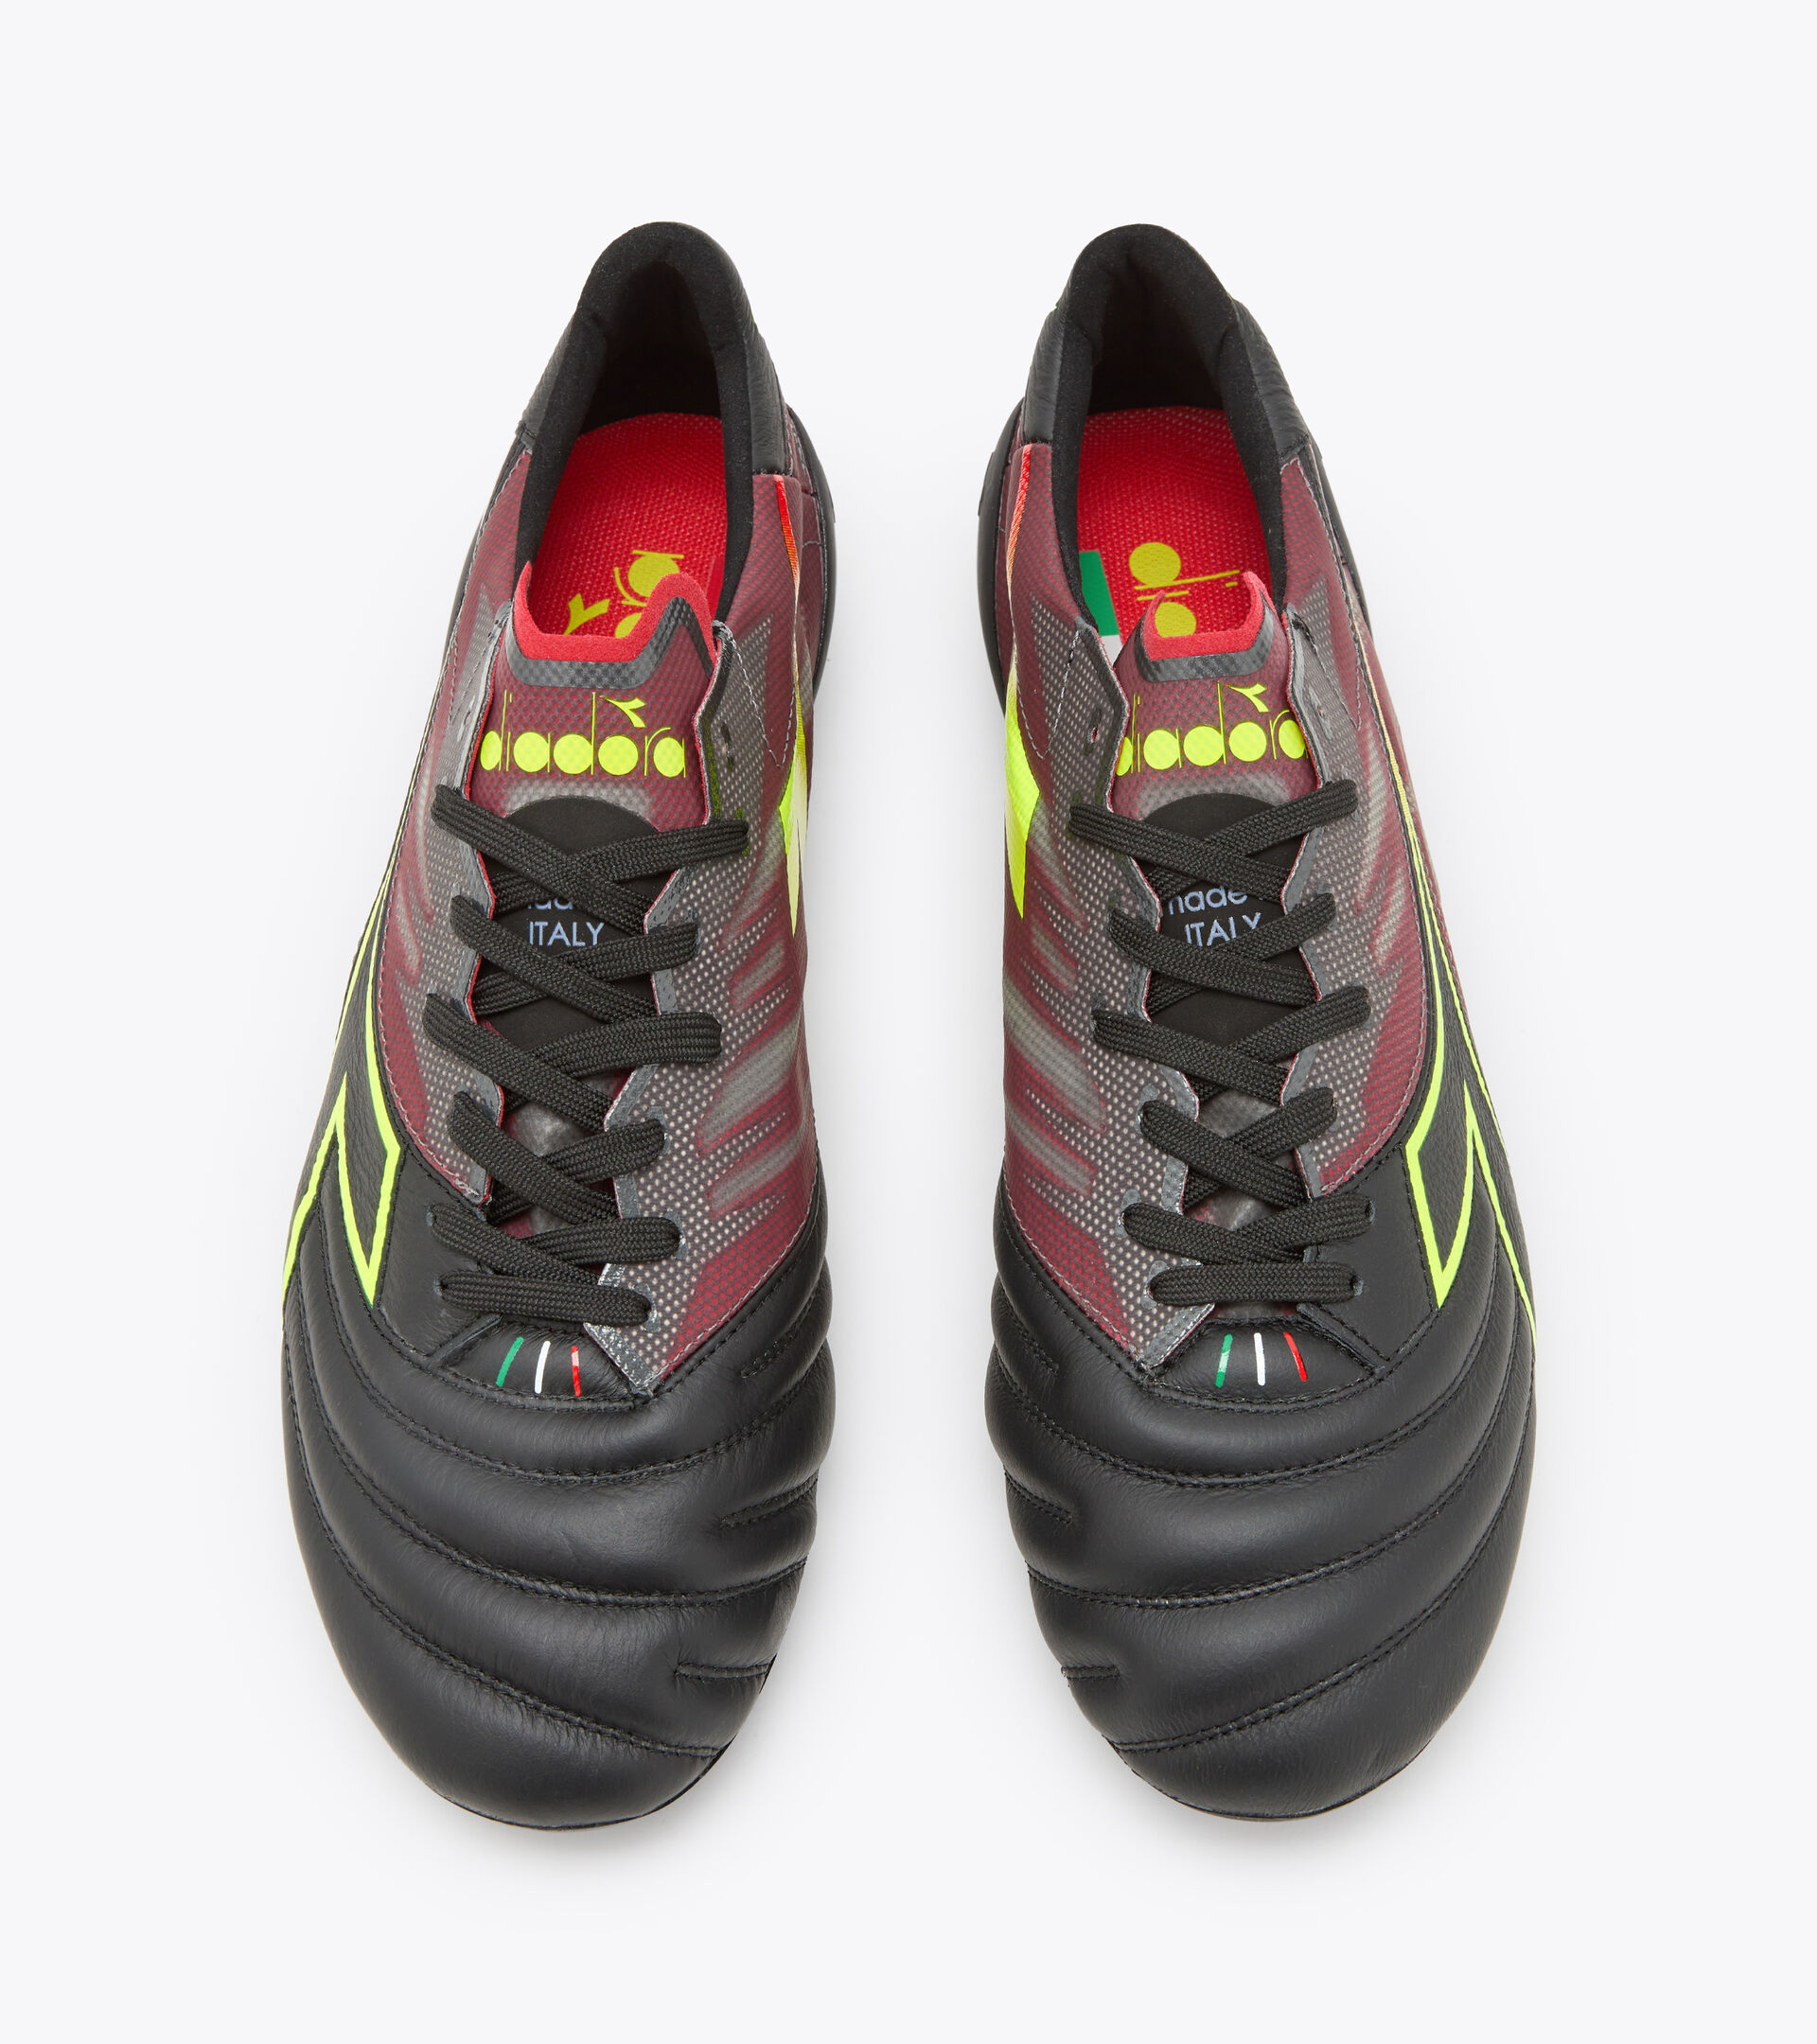 Firm ground football boots - Made in Italy BRASIL ELITE VELOCE ITA LPX BLK/FLUO YELLOW DD/MILANO RED - Diadora